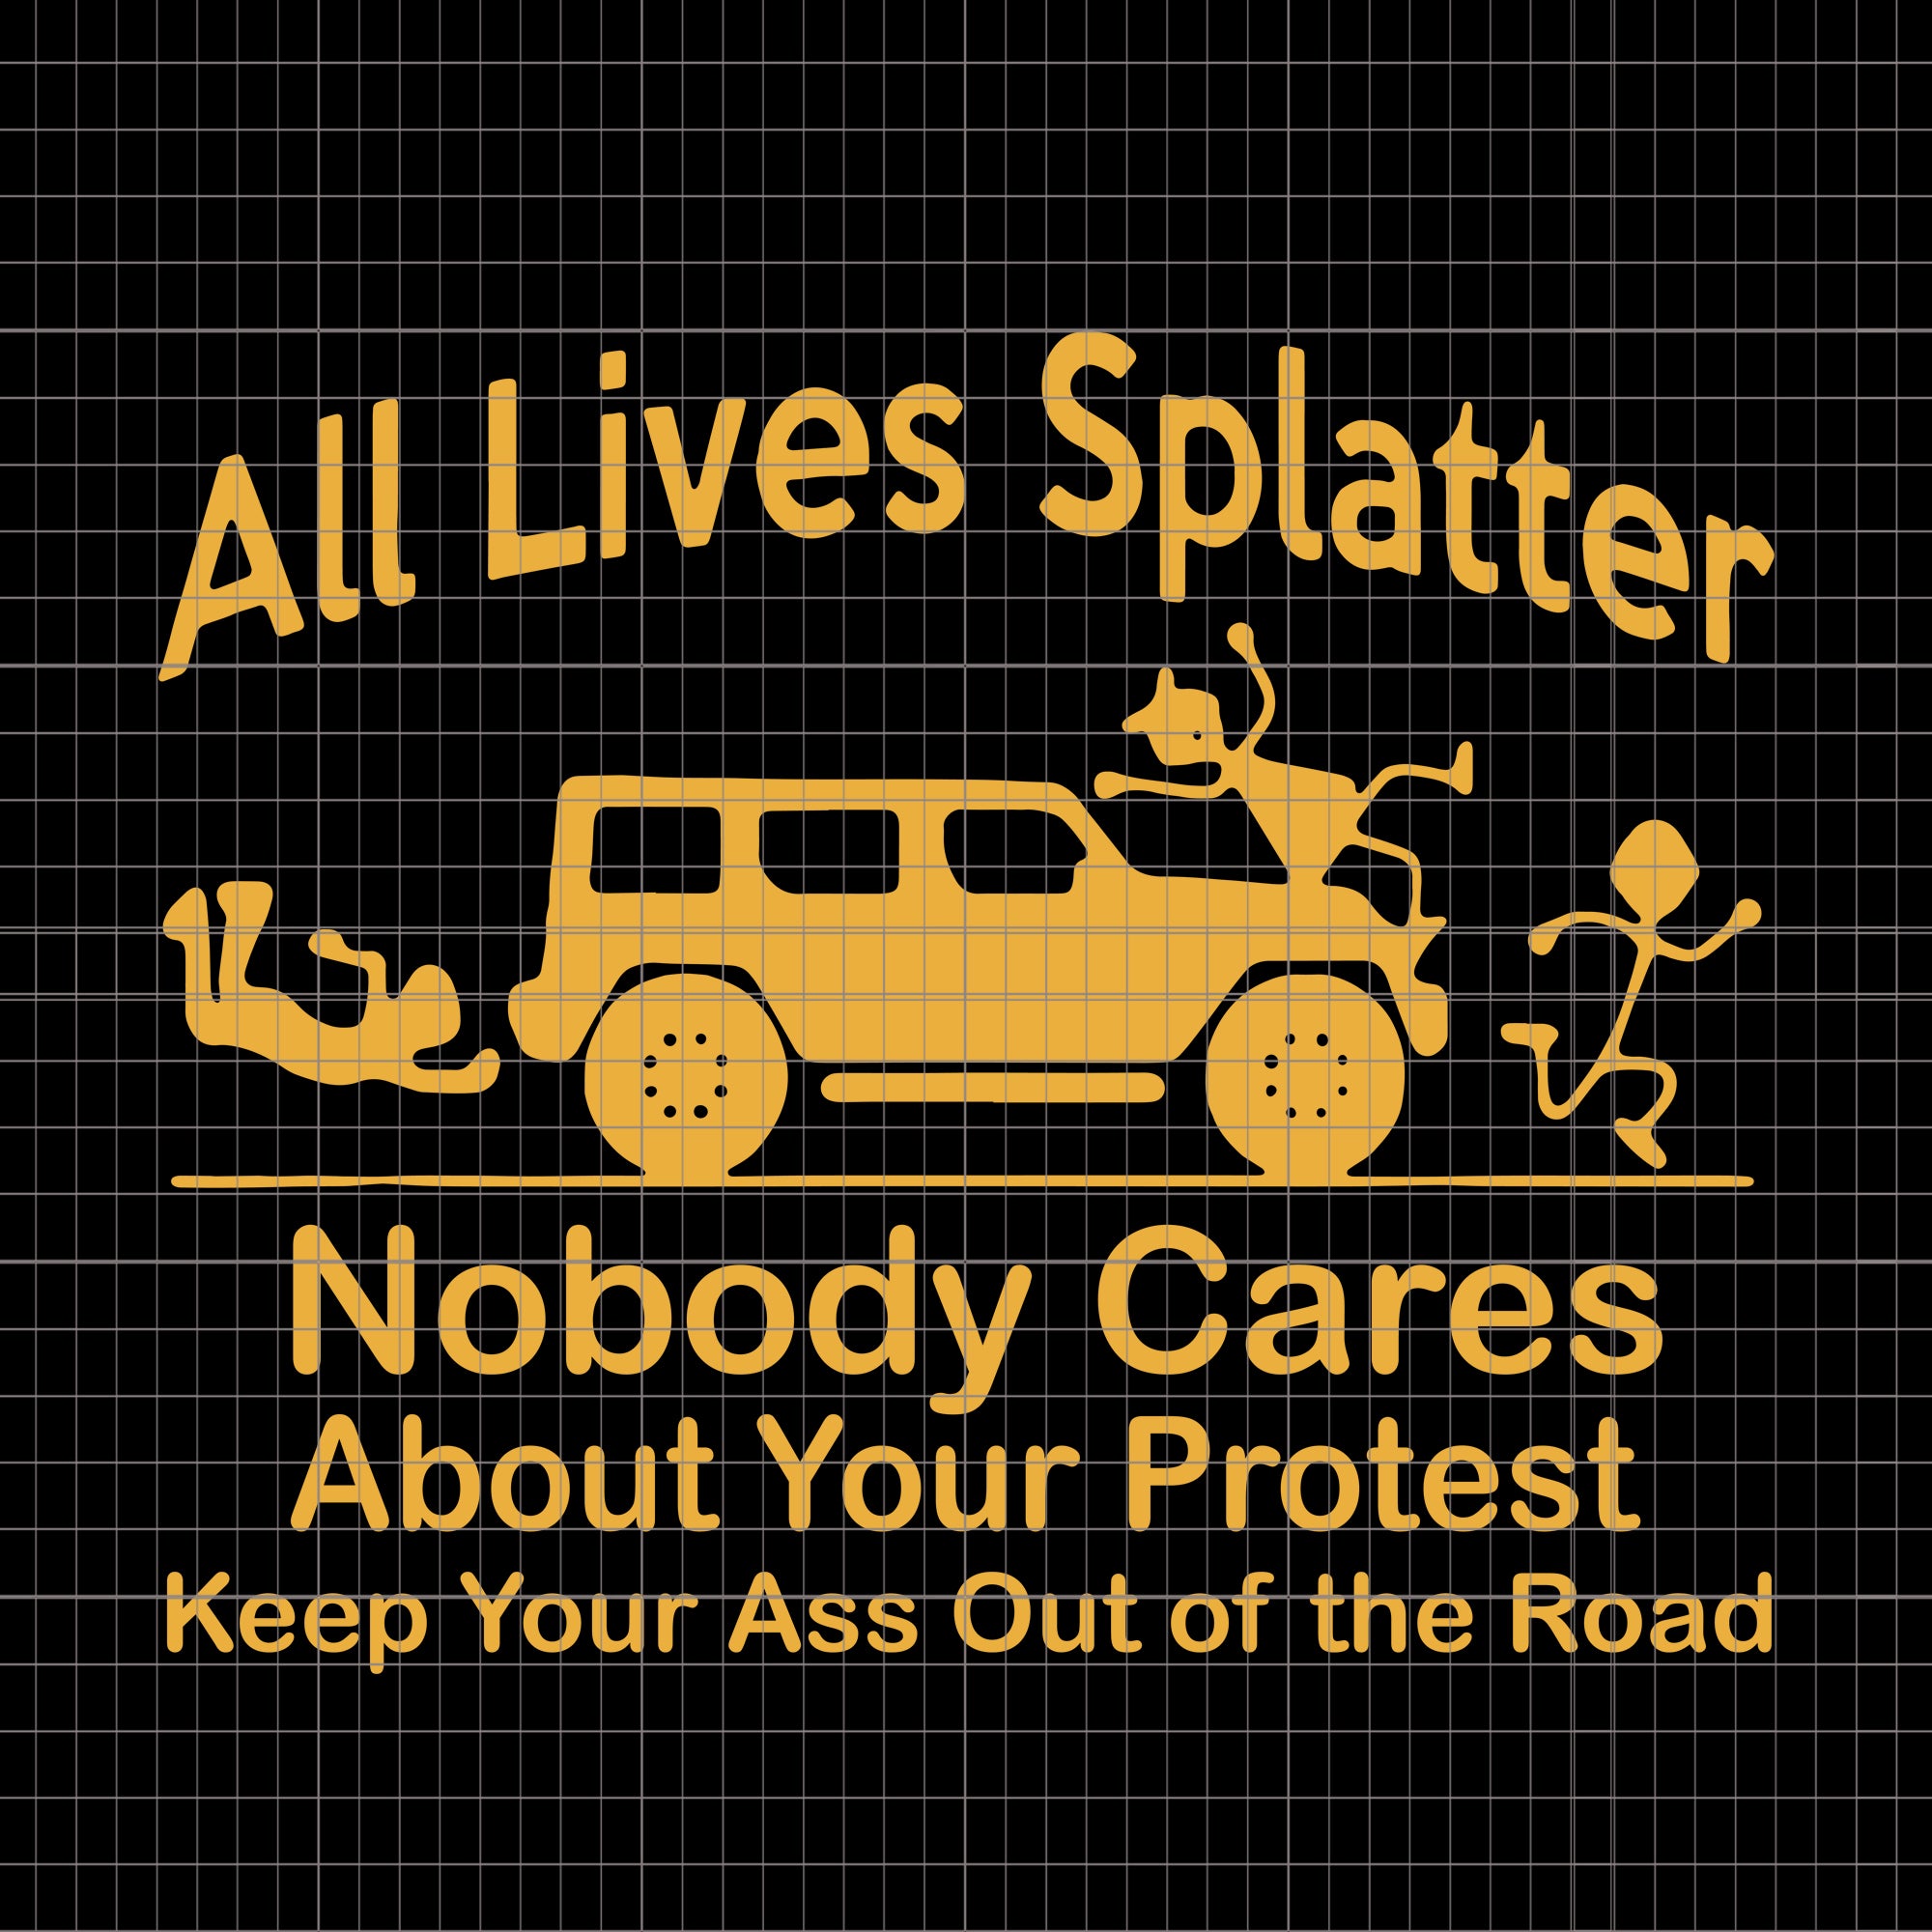 All lives nobody cares about your protes, all lives splatter nobody cares about your protest keep your ass out of the road svg, png, eps, dxf file